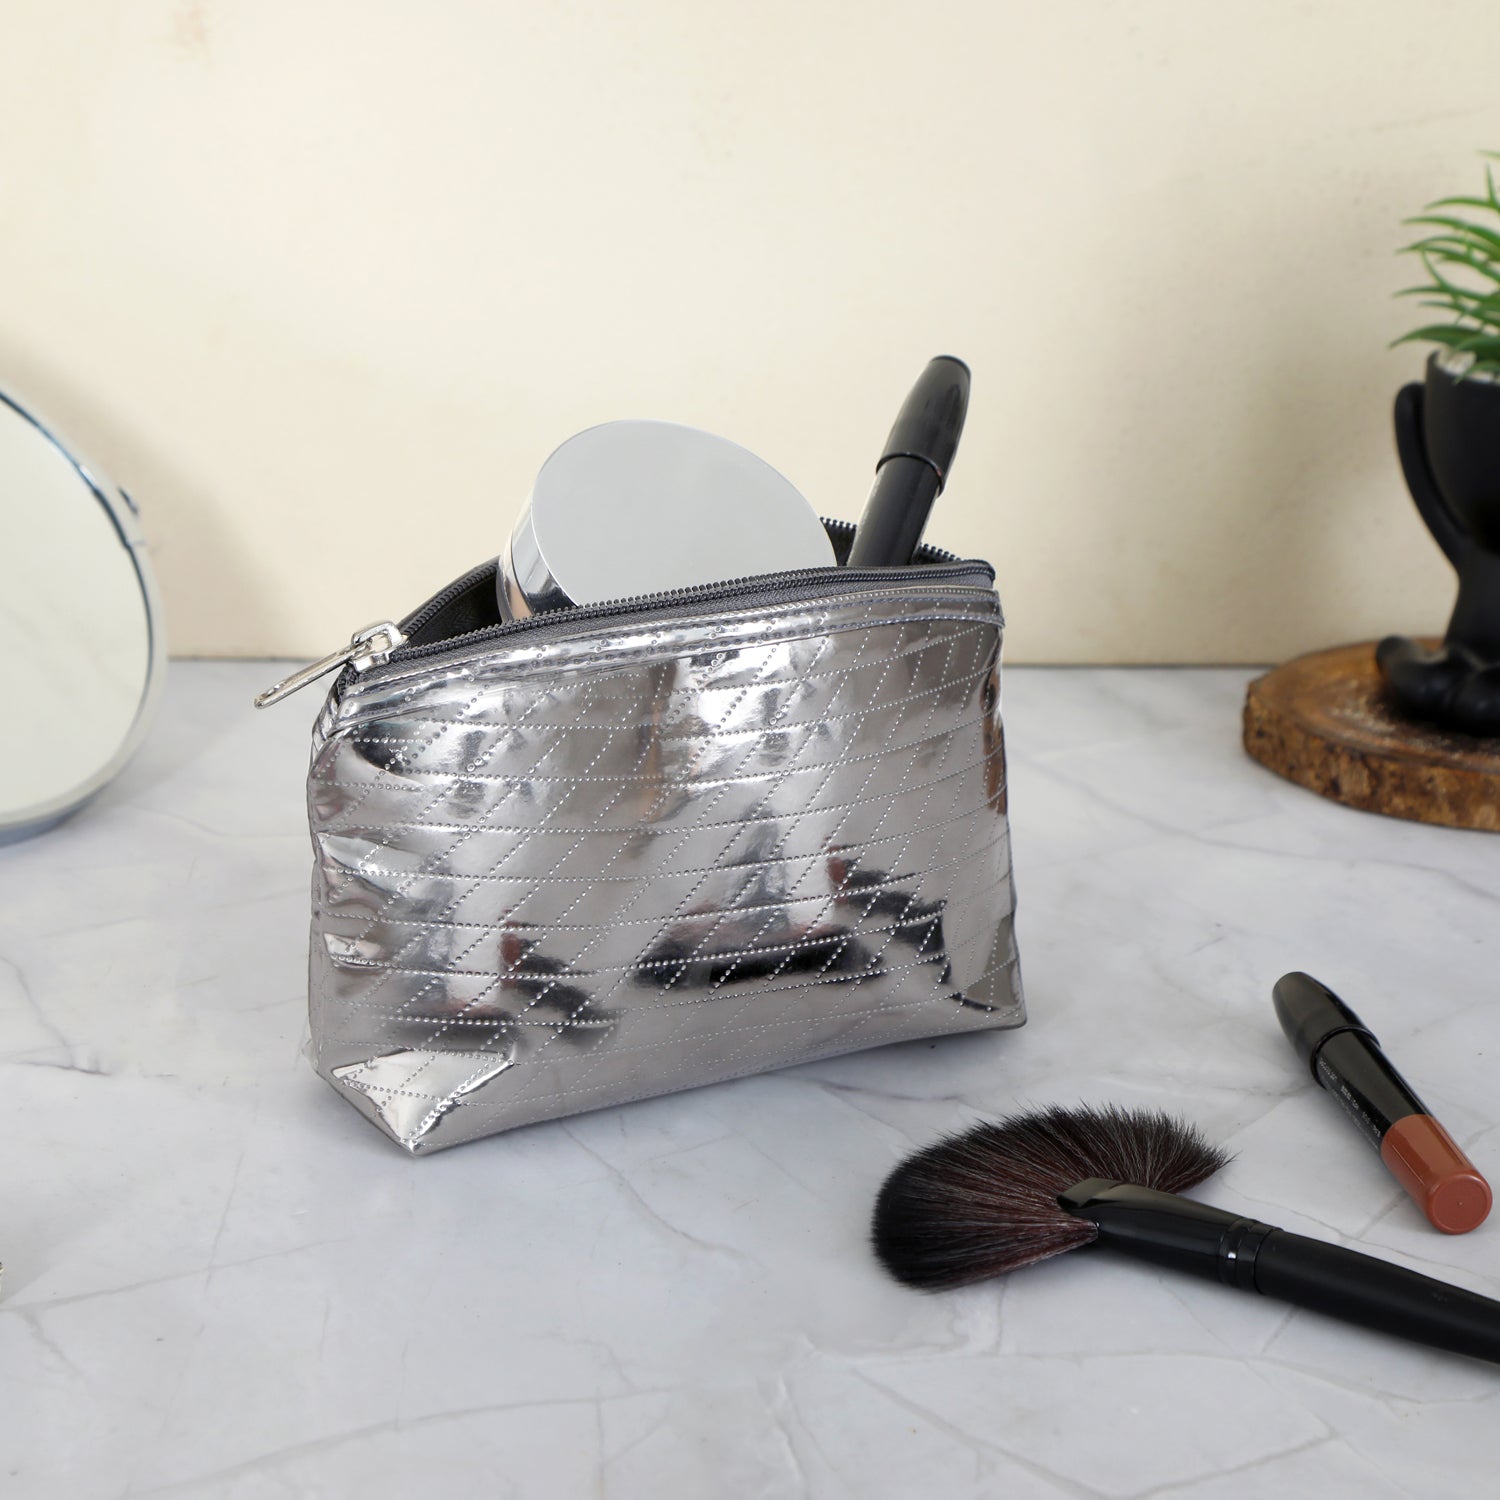 Travel Pouch - Silver Travel Pouches - Set of 3 Pouches - The Home Co.